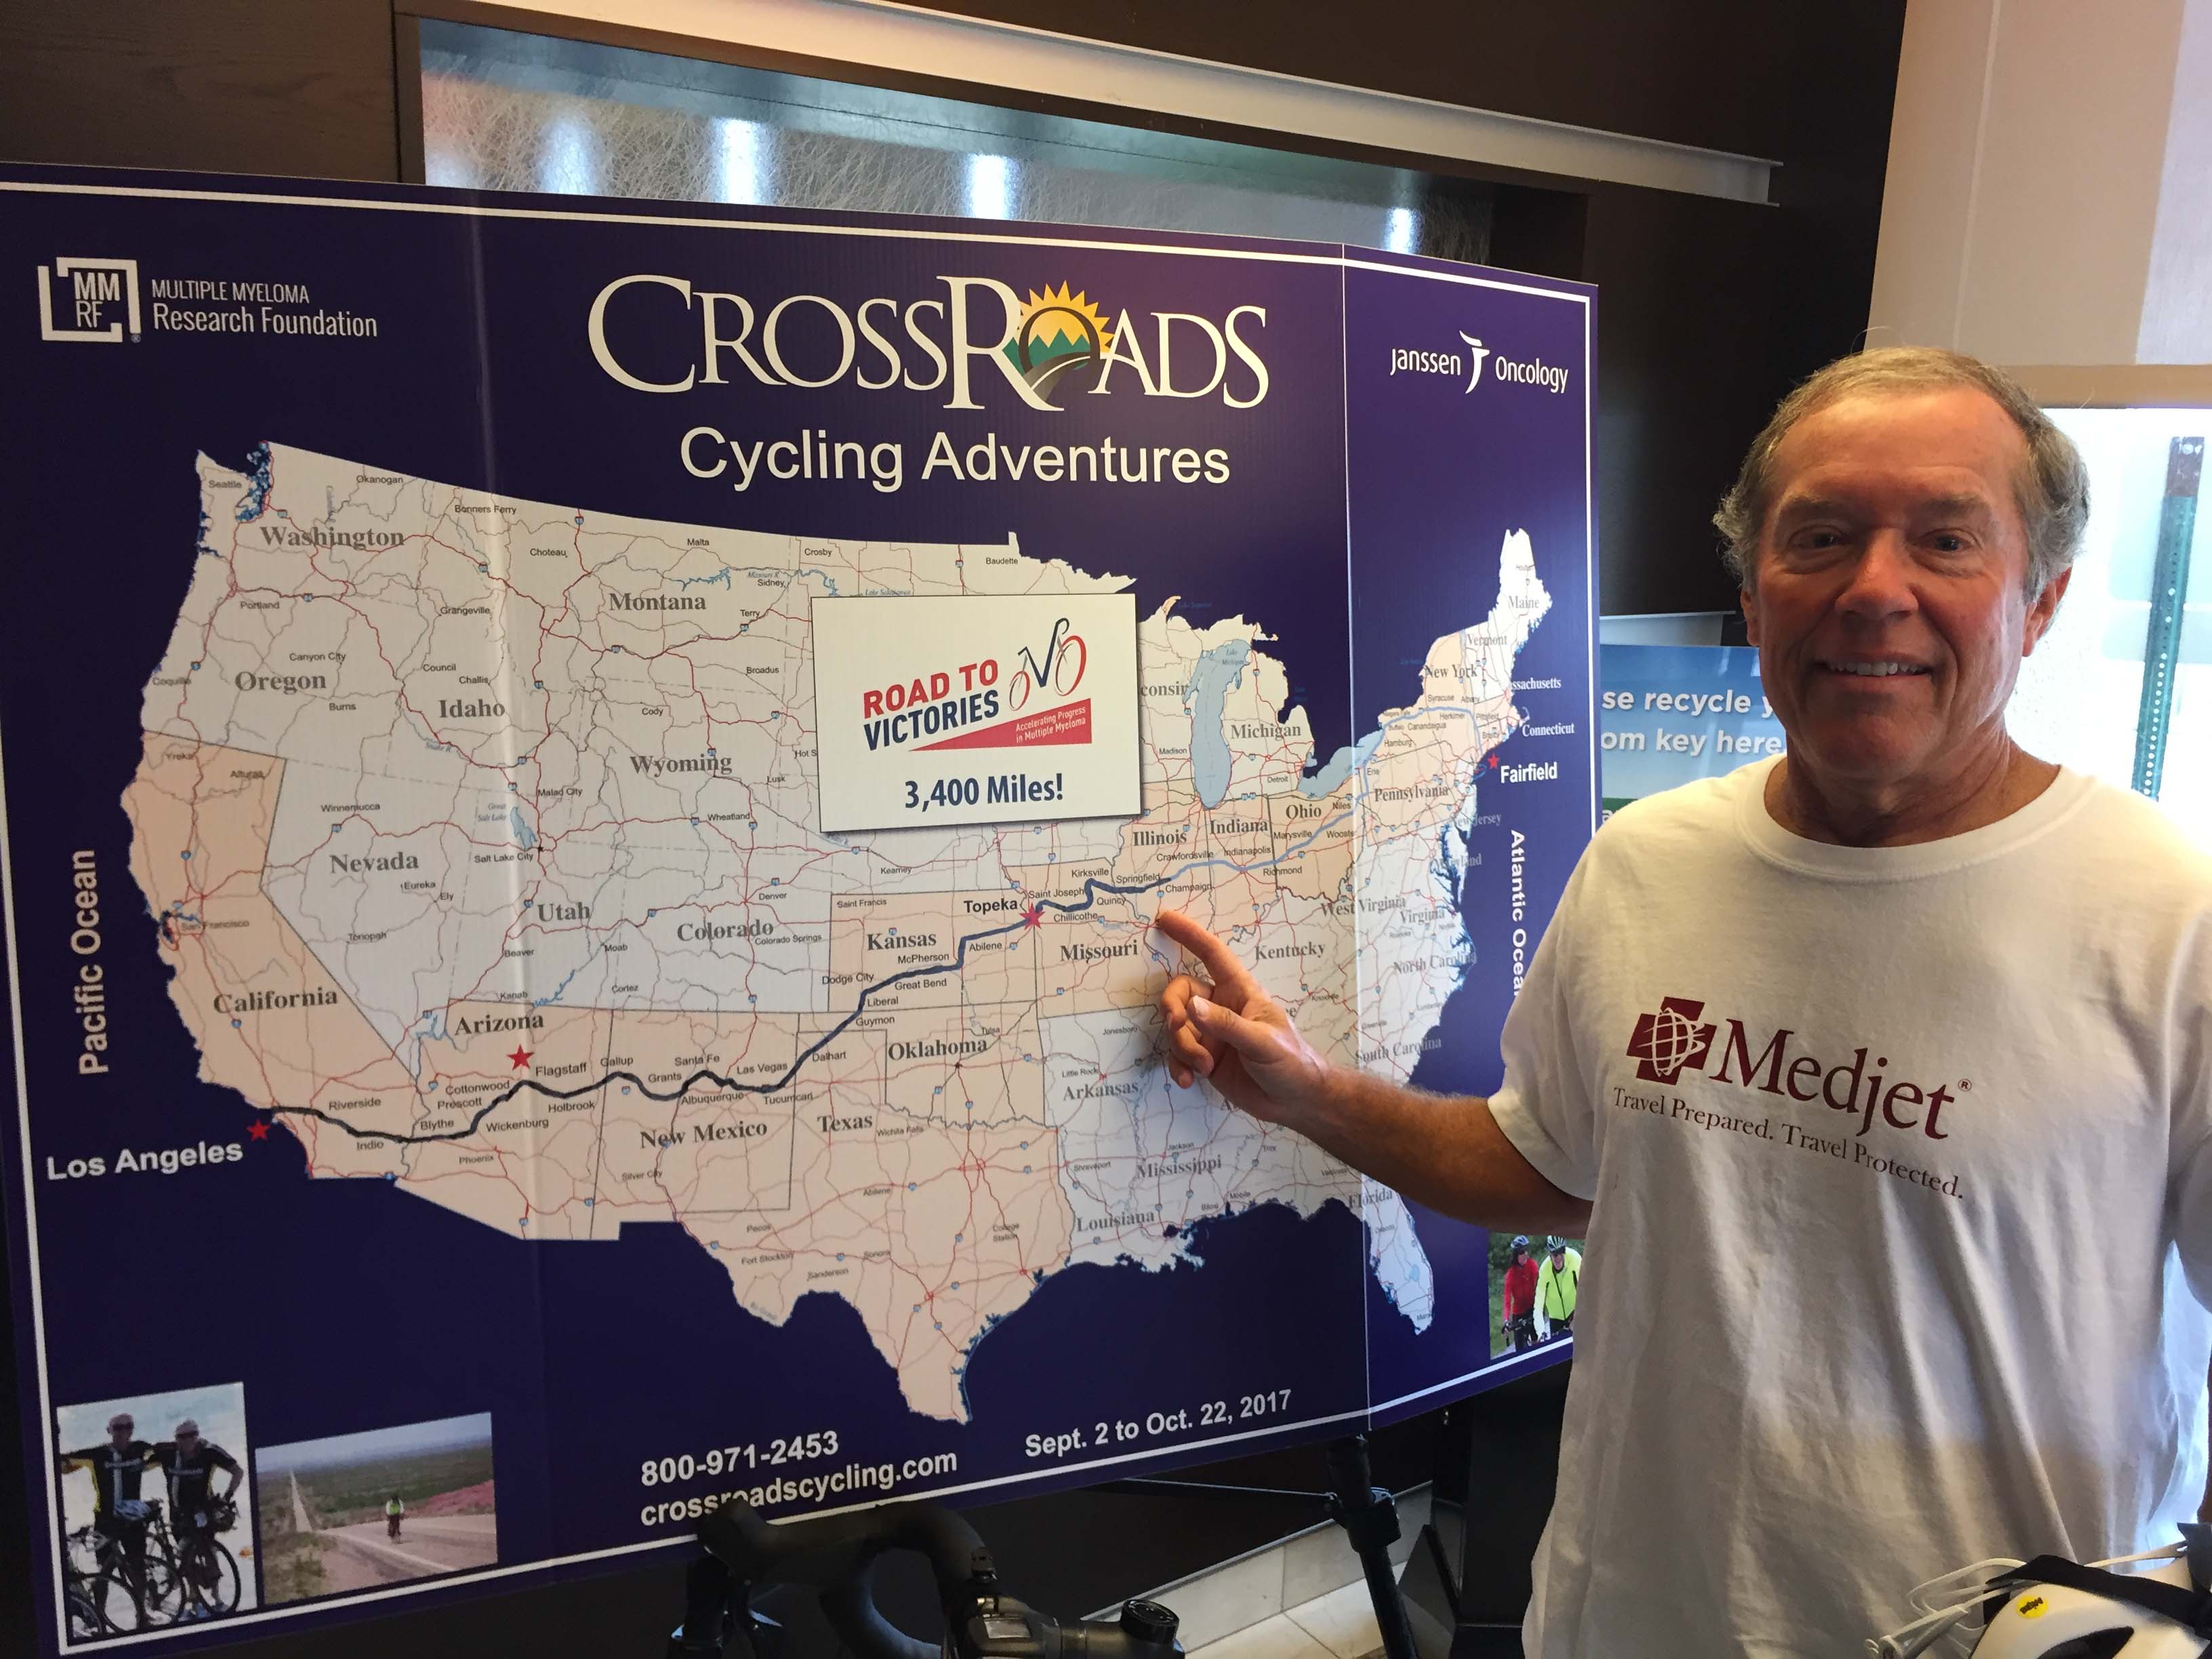 Chuck repping his Medjet shirt while showing his biking route